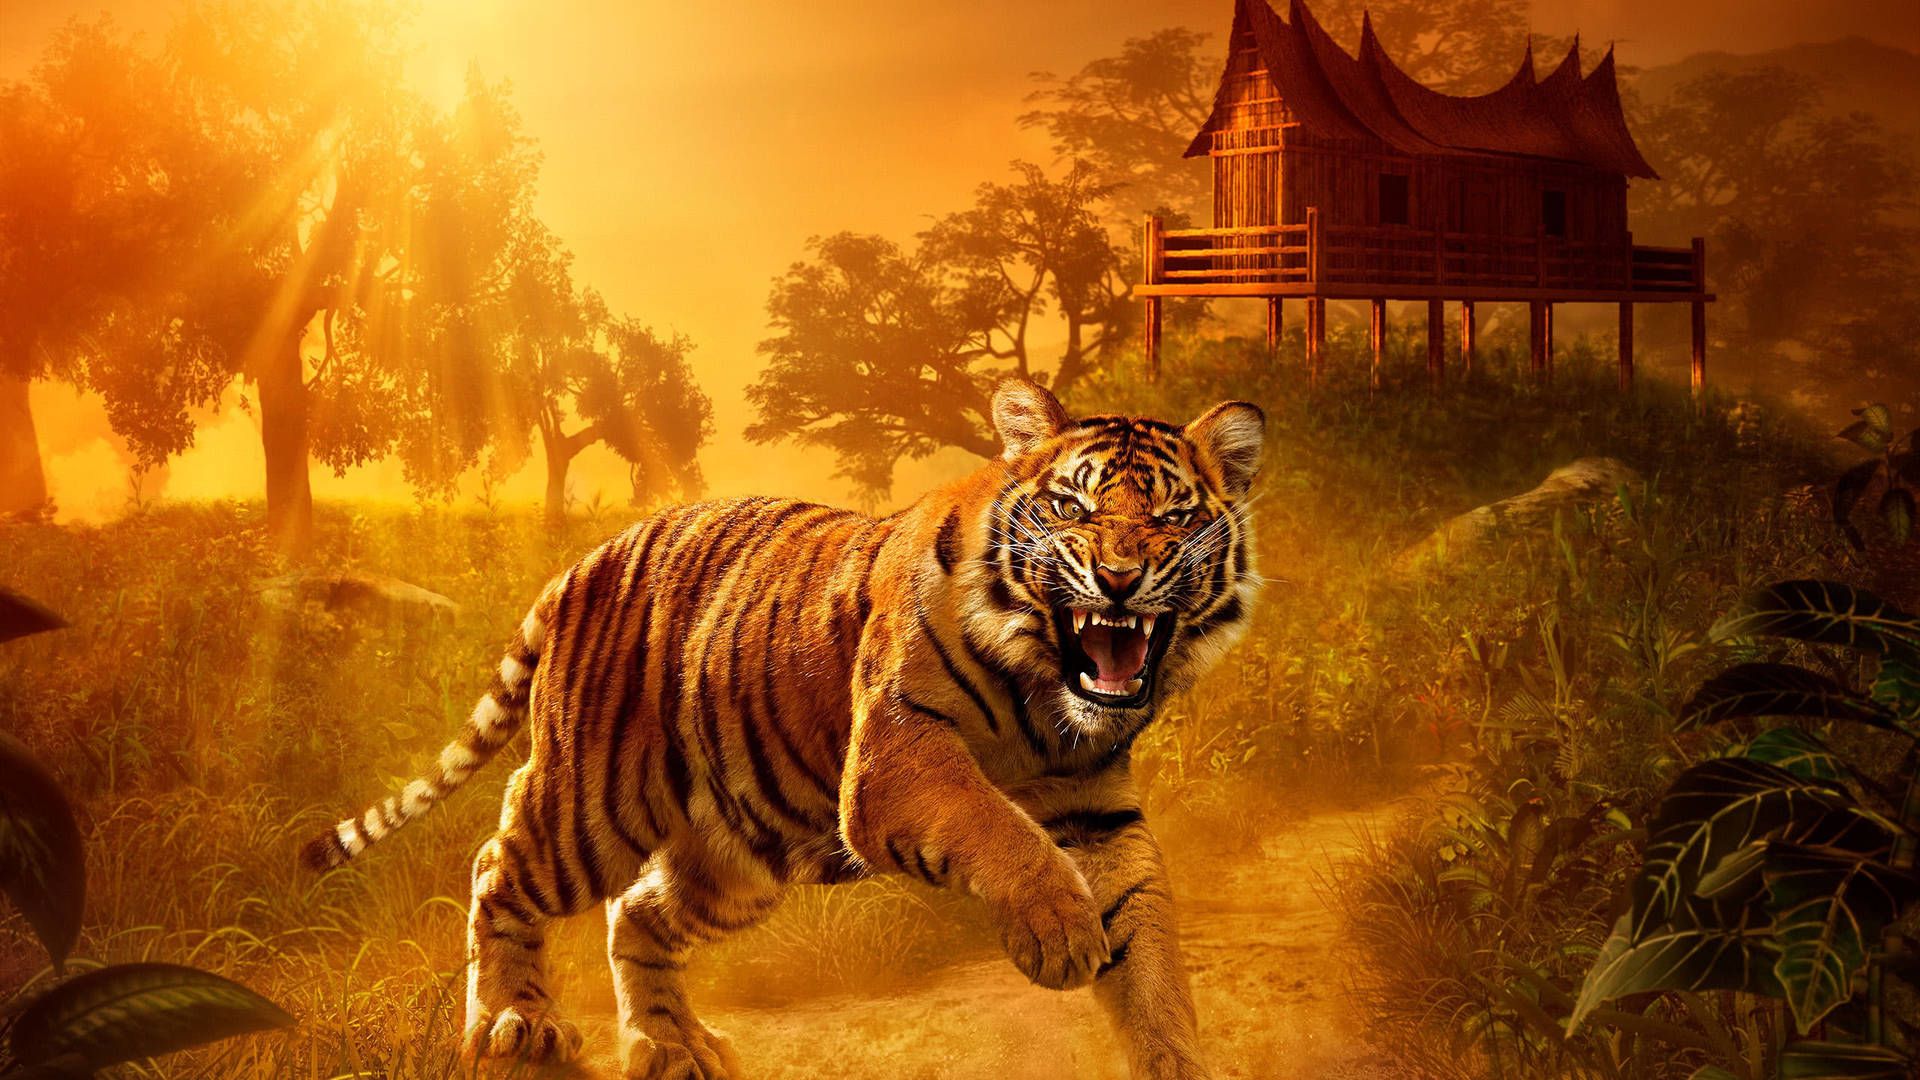 Download 1440p HD Tiger In Forest Orange Aesthetic Wallpaper